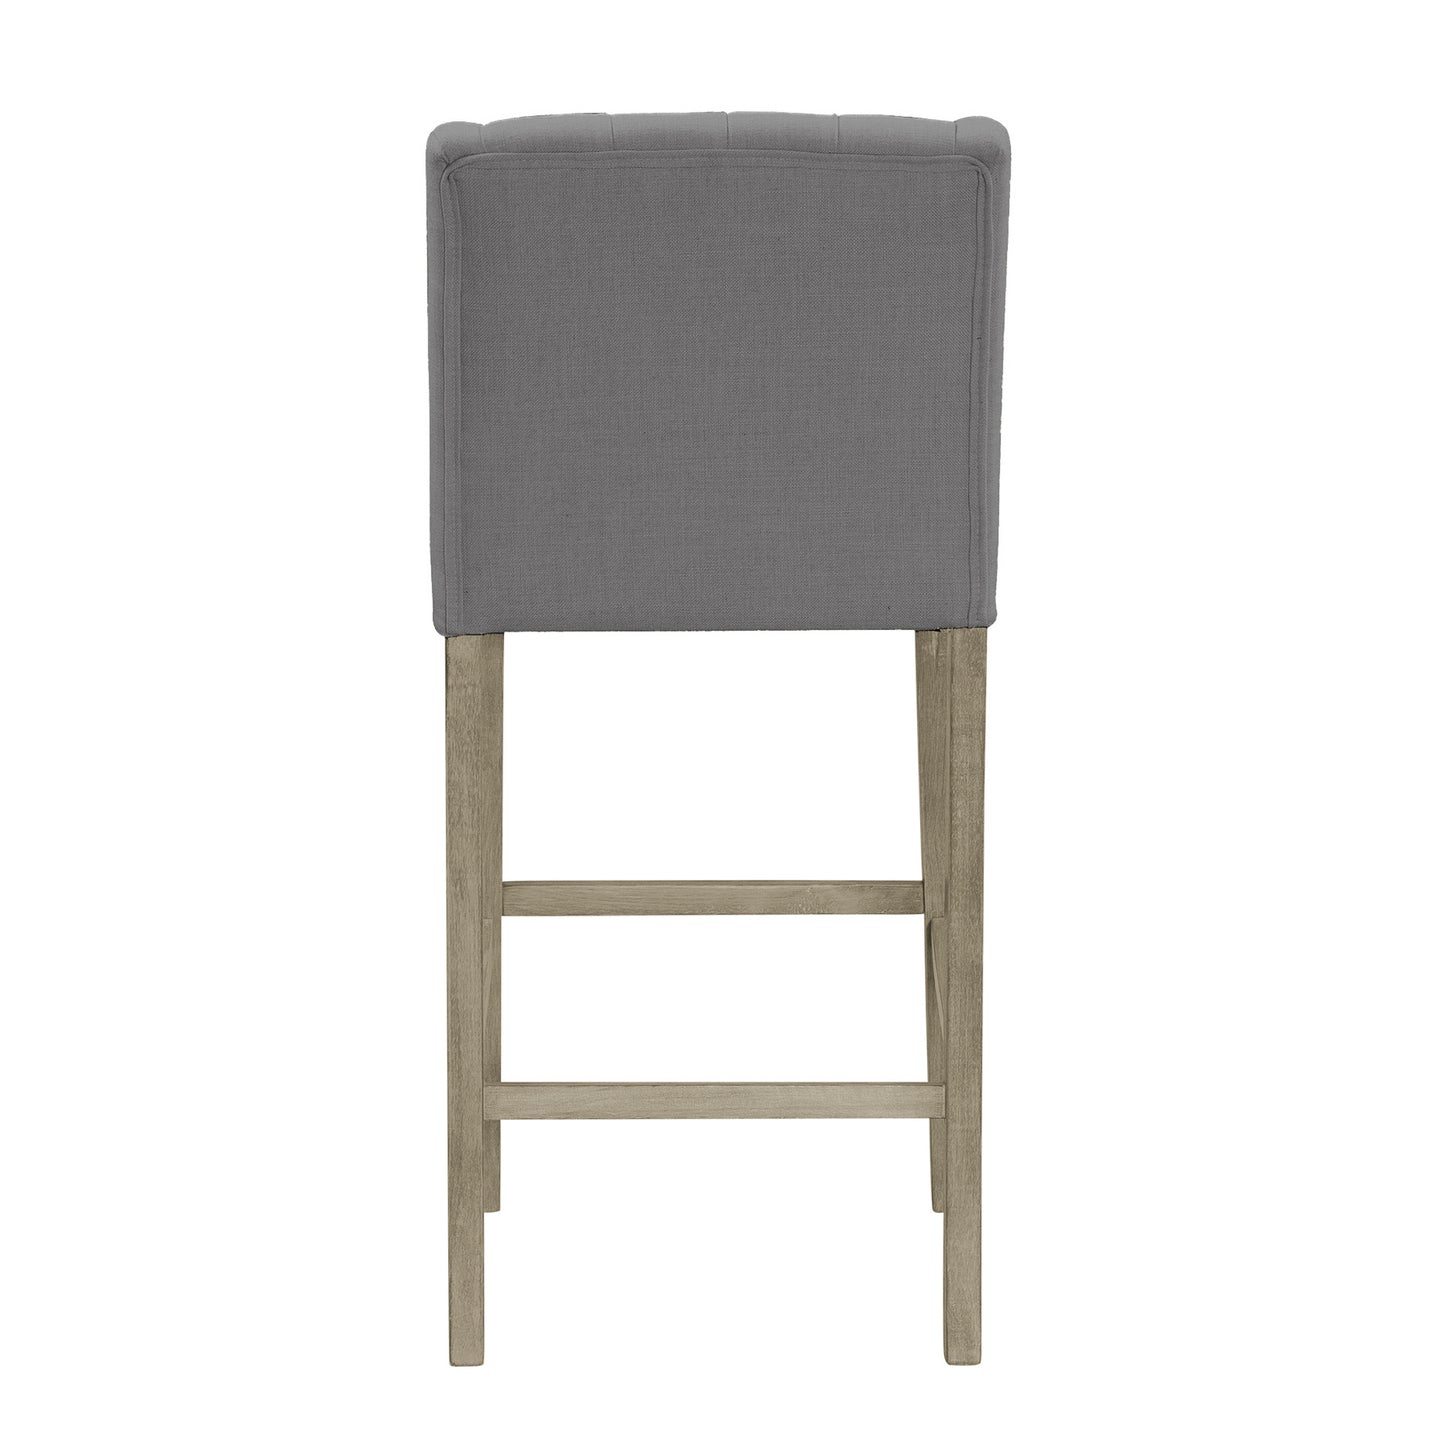 Set of 2 Aled Grey Fabric Bar Stool with Side Wings and Tufted Buttons